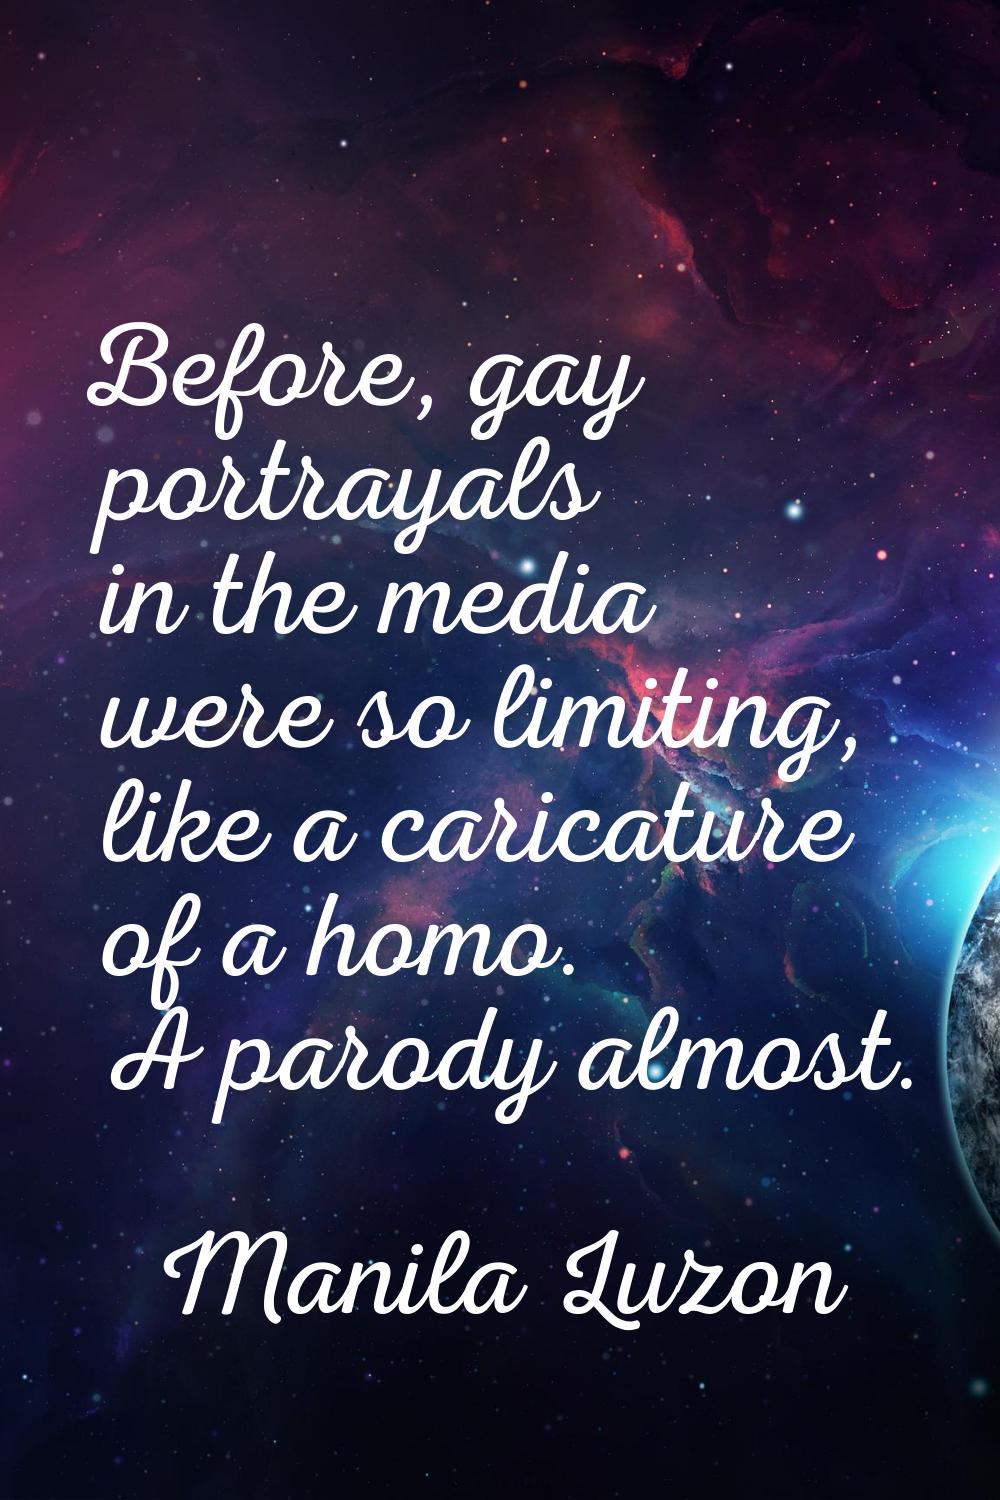 Before, gay portrayals in the media were so limiting, like a caricature of a homo. A parody almost.